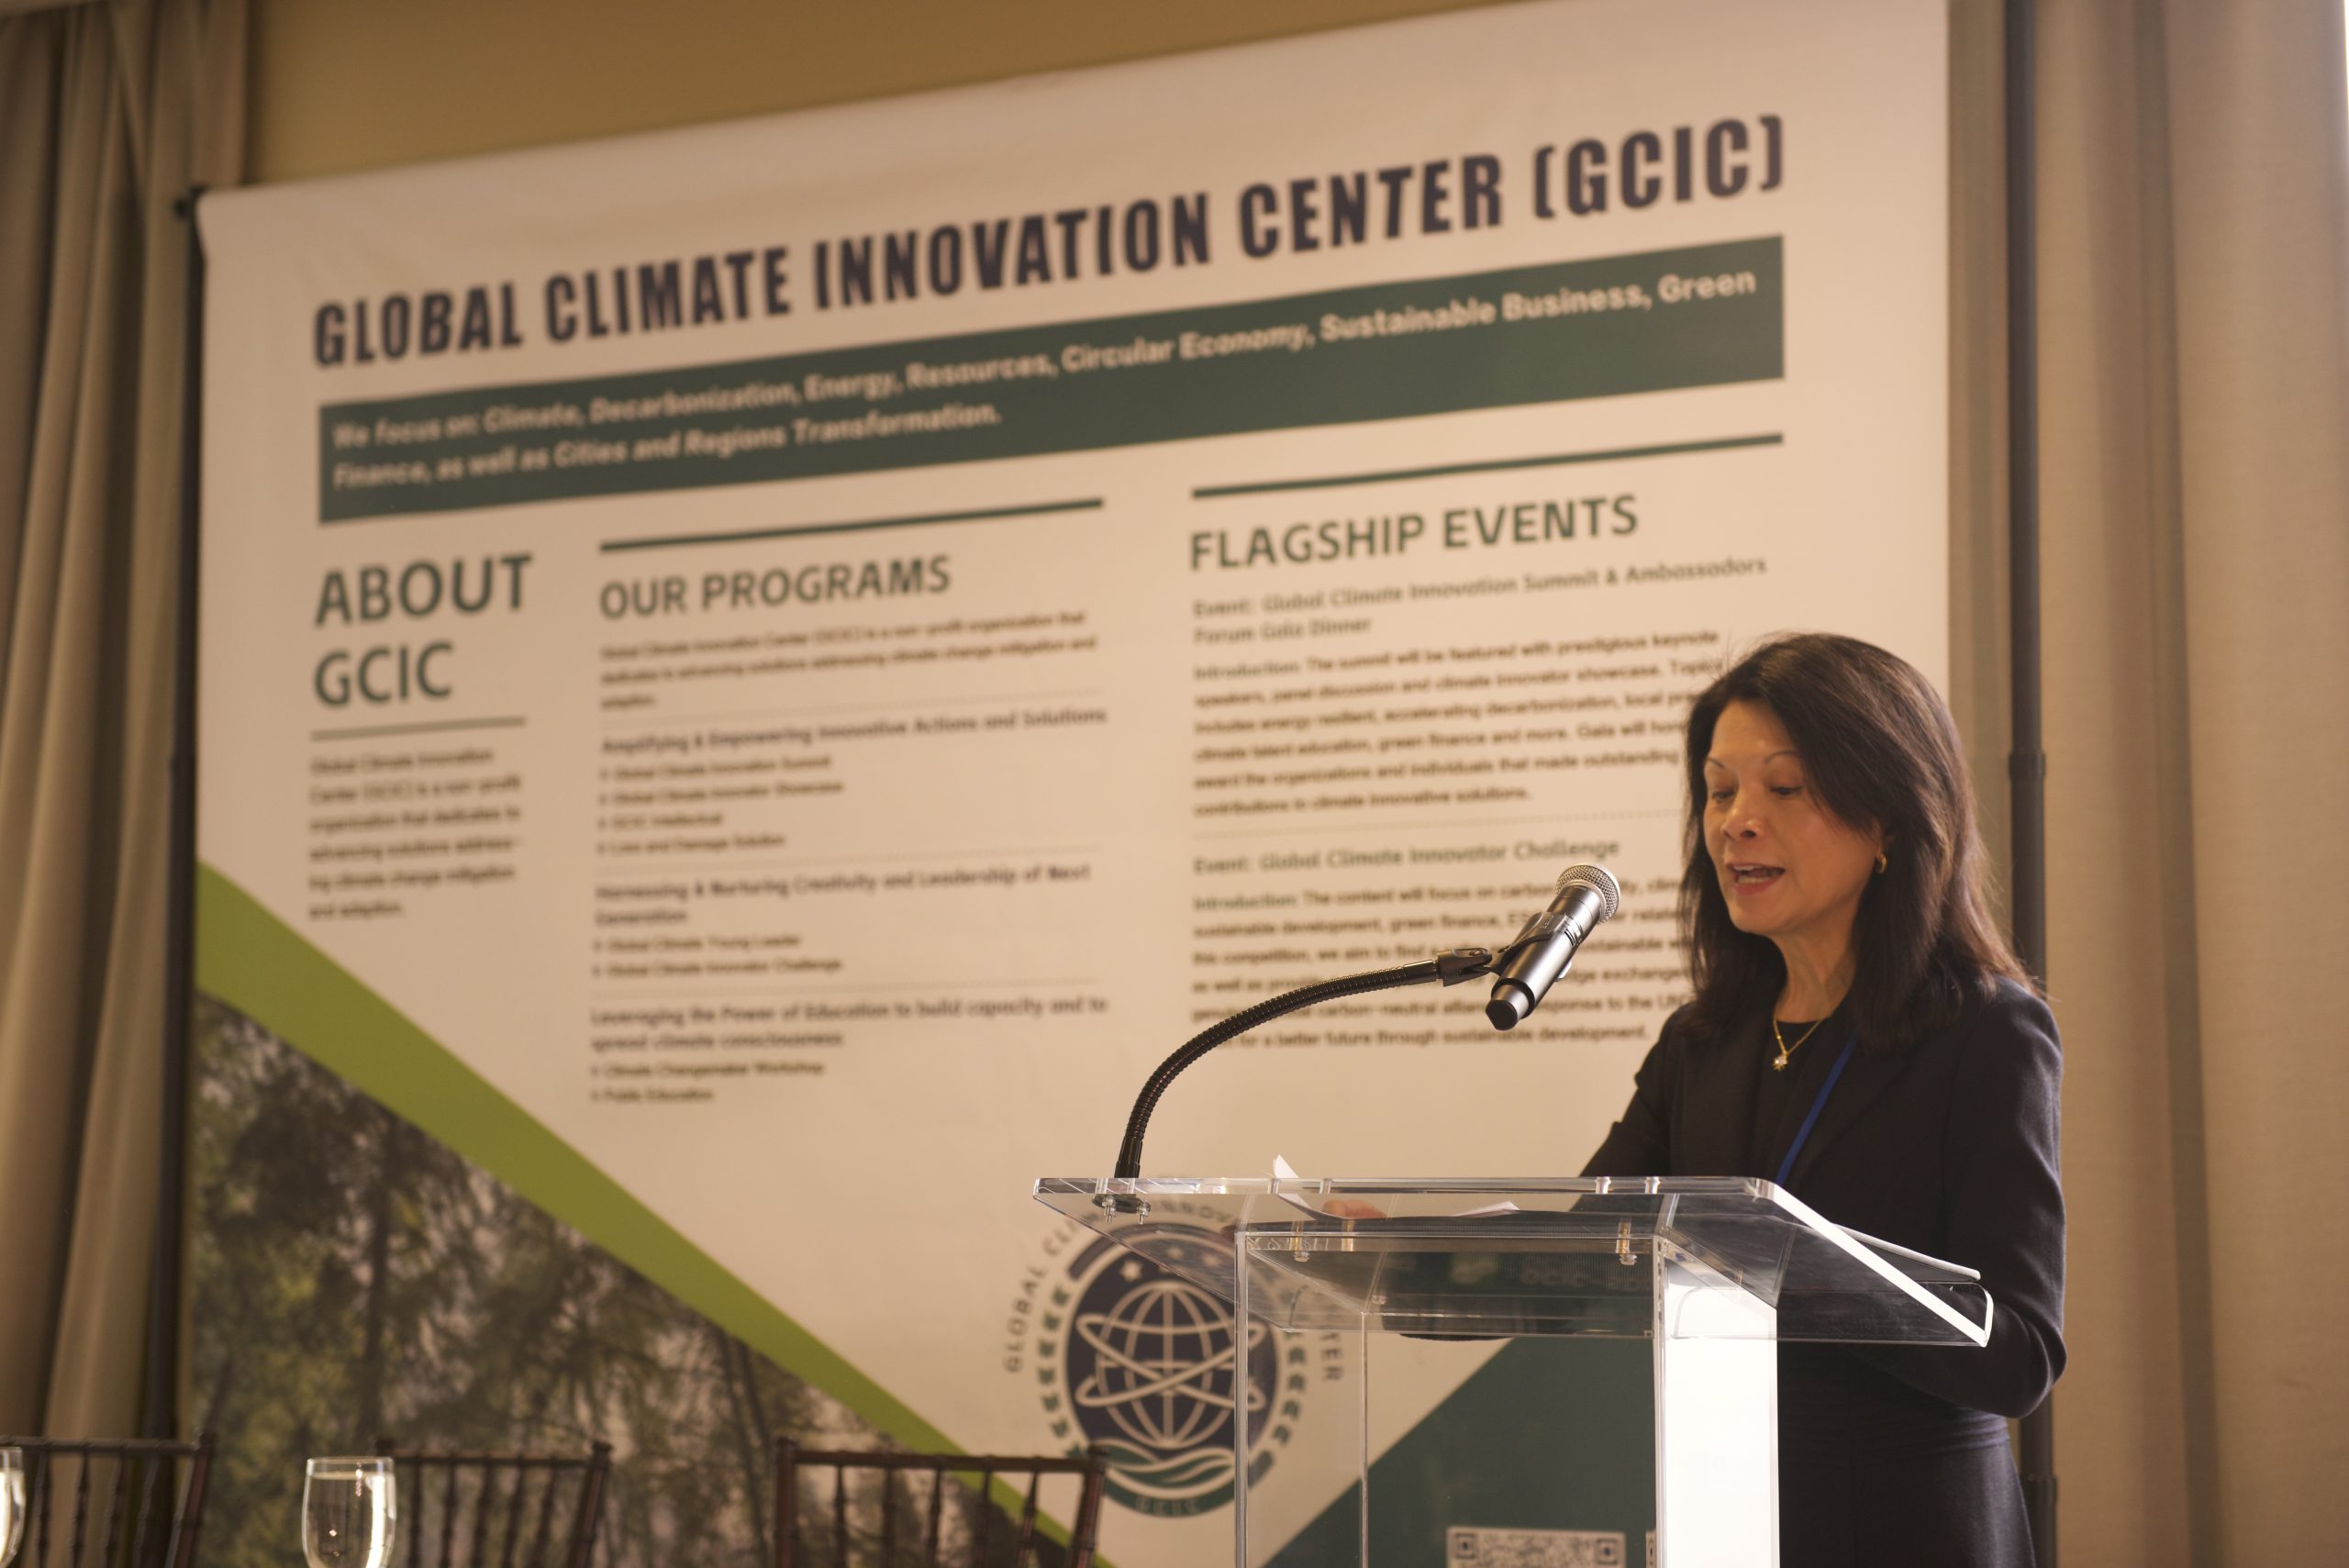 Meeting Hosted by the Global Climate Innovation Center